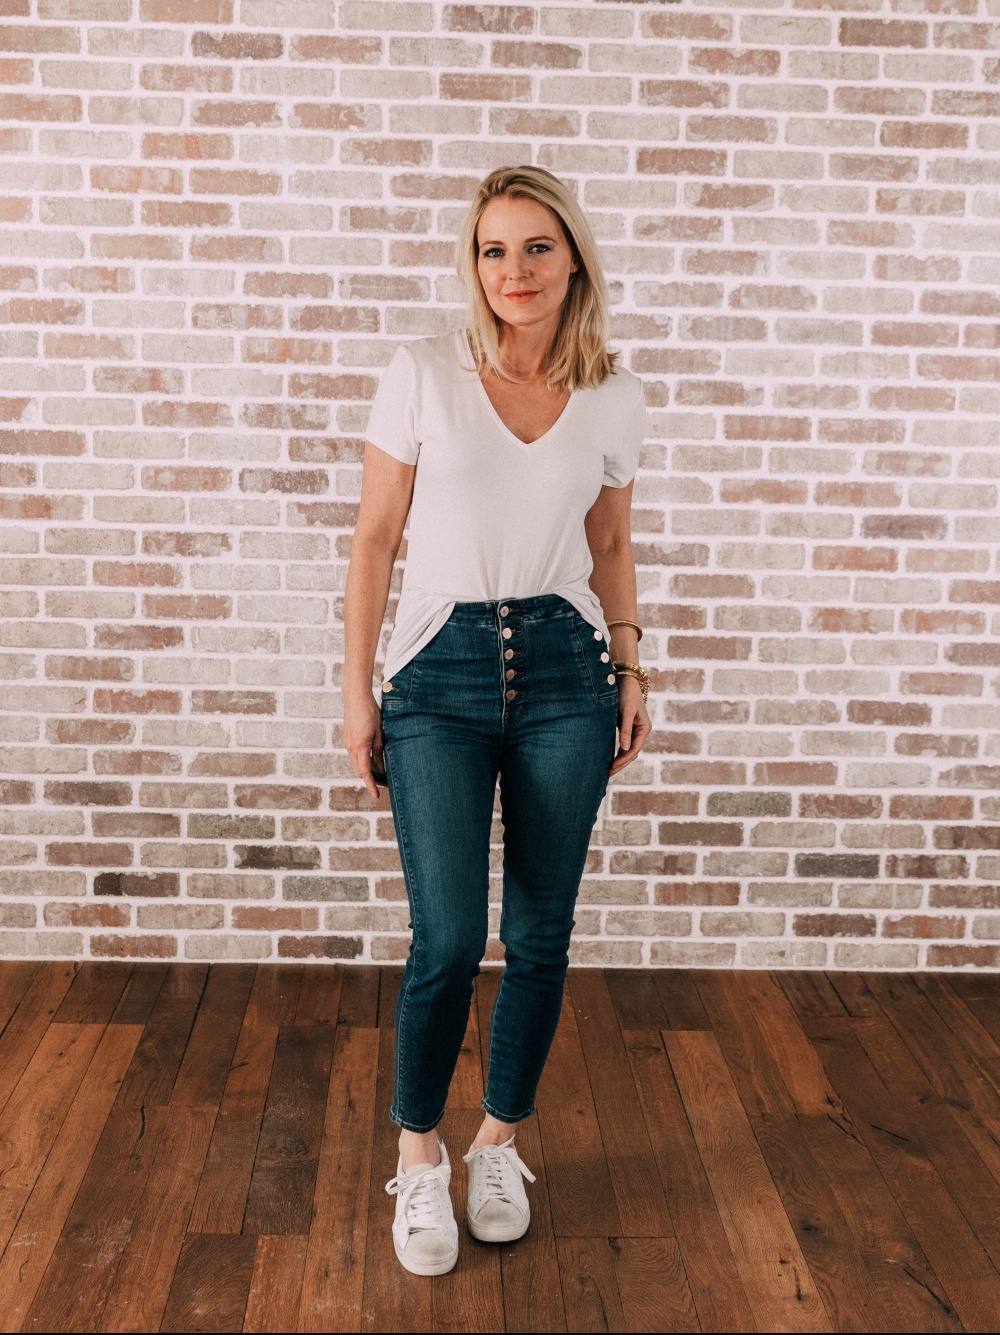 Best White Tees, Fashion blogger Erin Busbee of BusbeeStyle.com sharing wear a white tee by Michael Stars with button fly skinny jeans and white sneakers in her studio in Telluride, Colorado